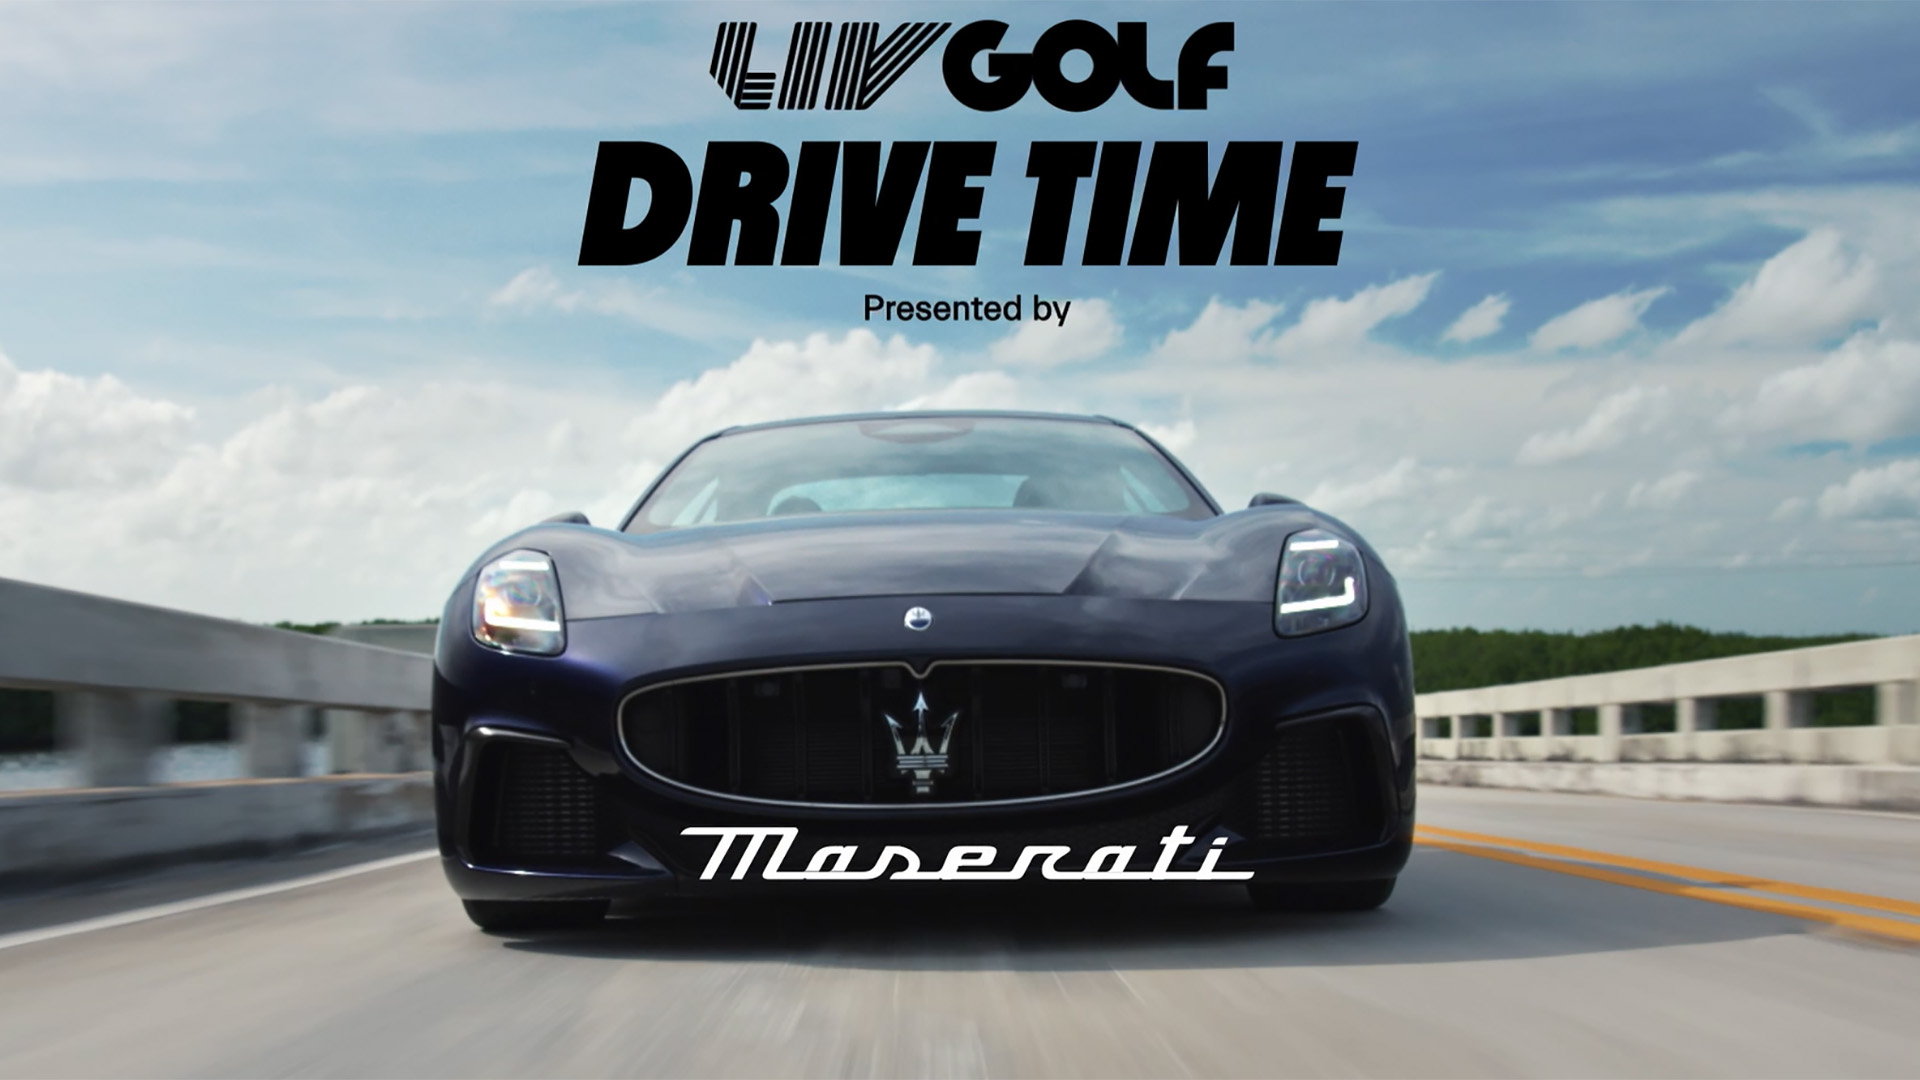 DRIVE TIME: JOIN THE MAJESTICKS FOR A RIDE IN A MASERATI